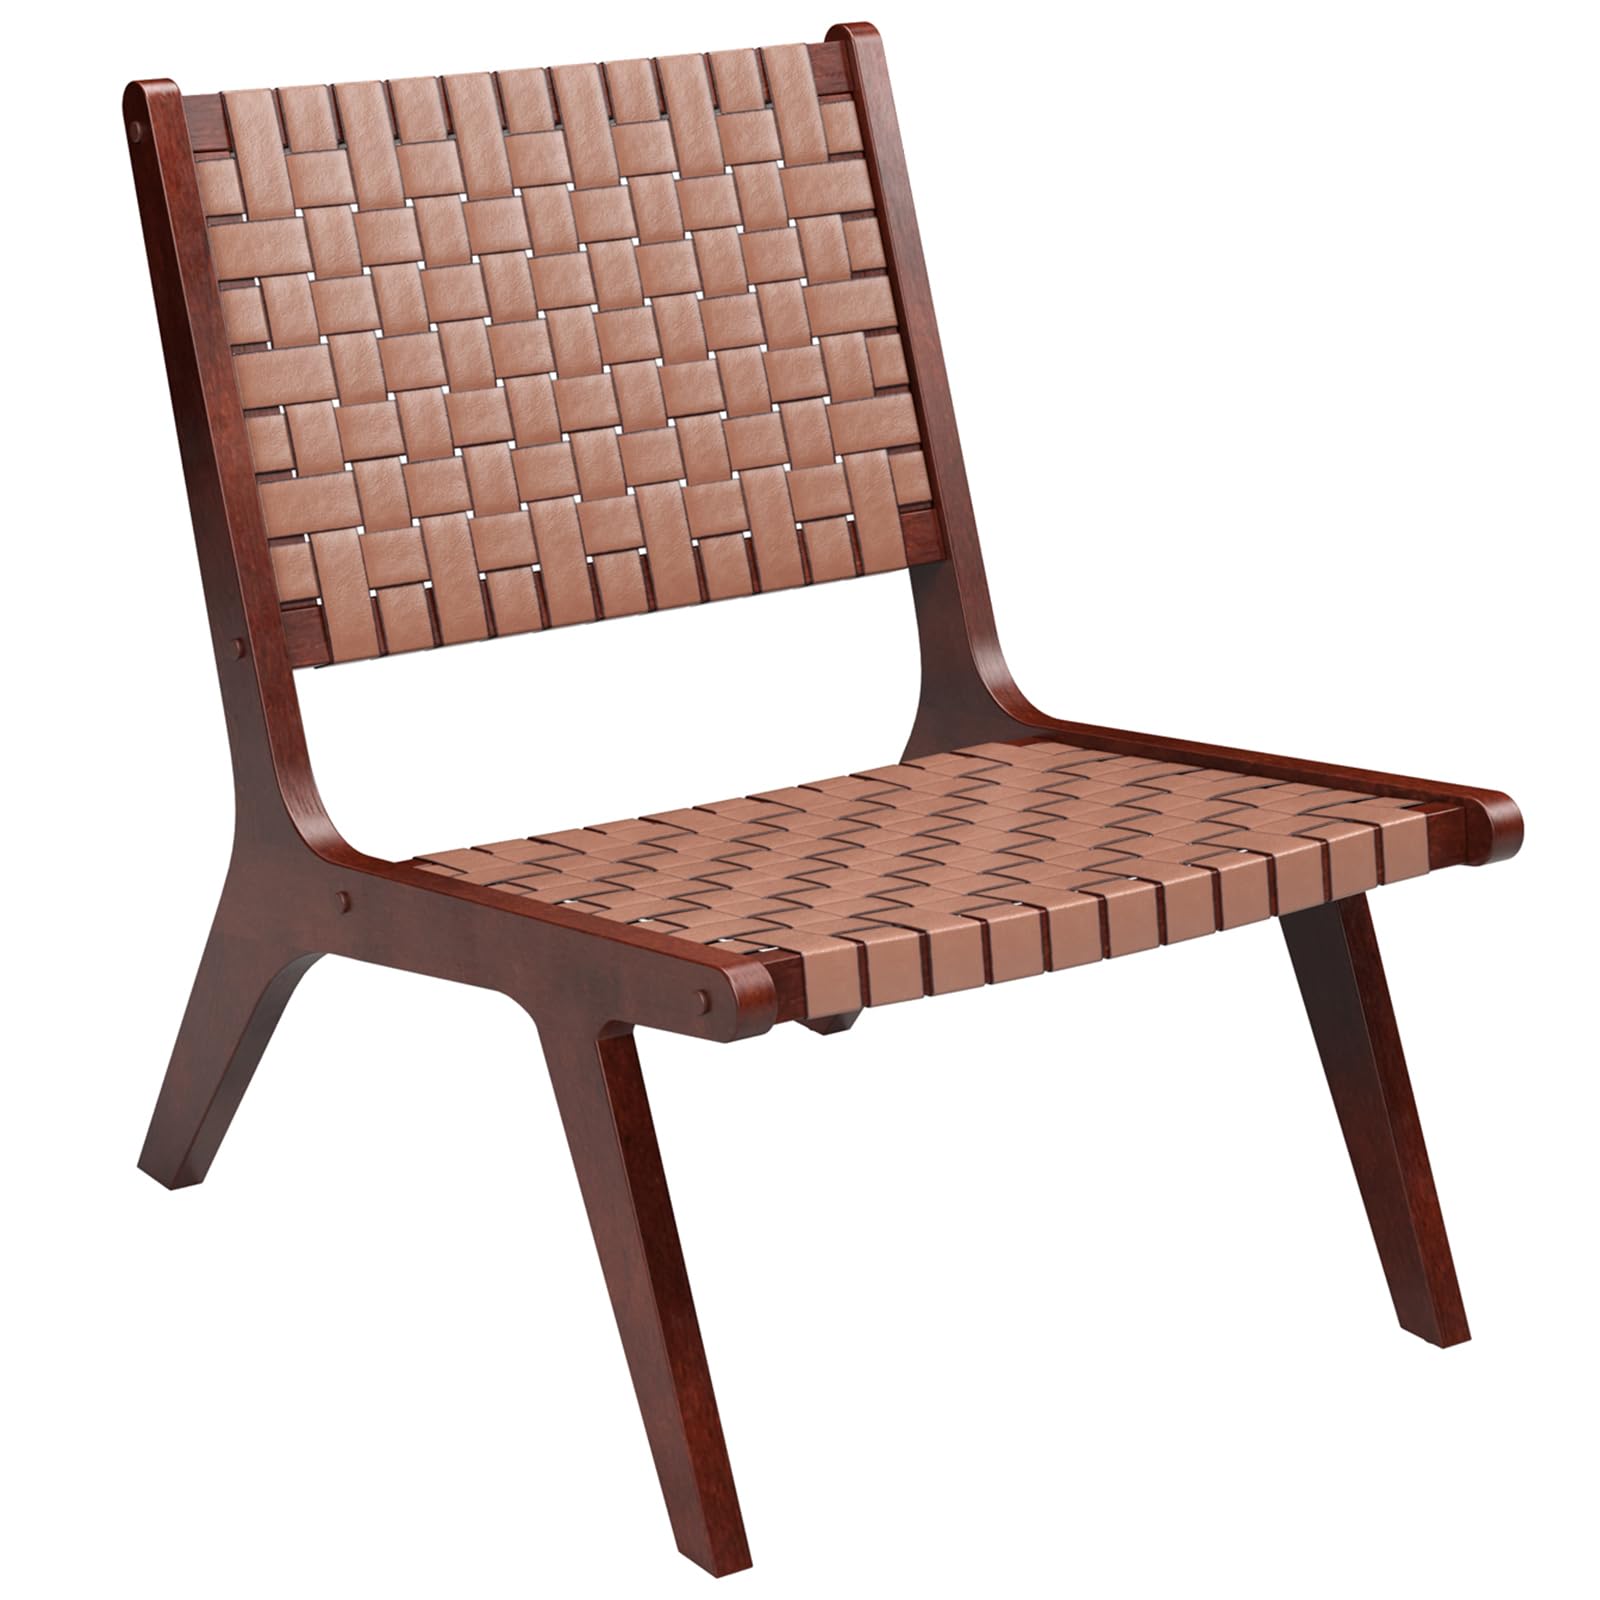 Giantex Woven Leather Accent Chair, Mid Century Modern Lounge Chair with Wood Frame, Max Load 300 Lbs, Brown